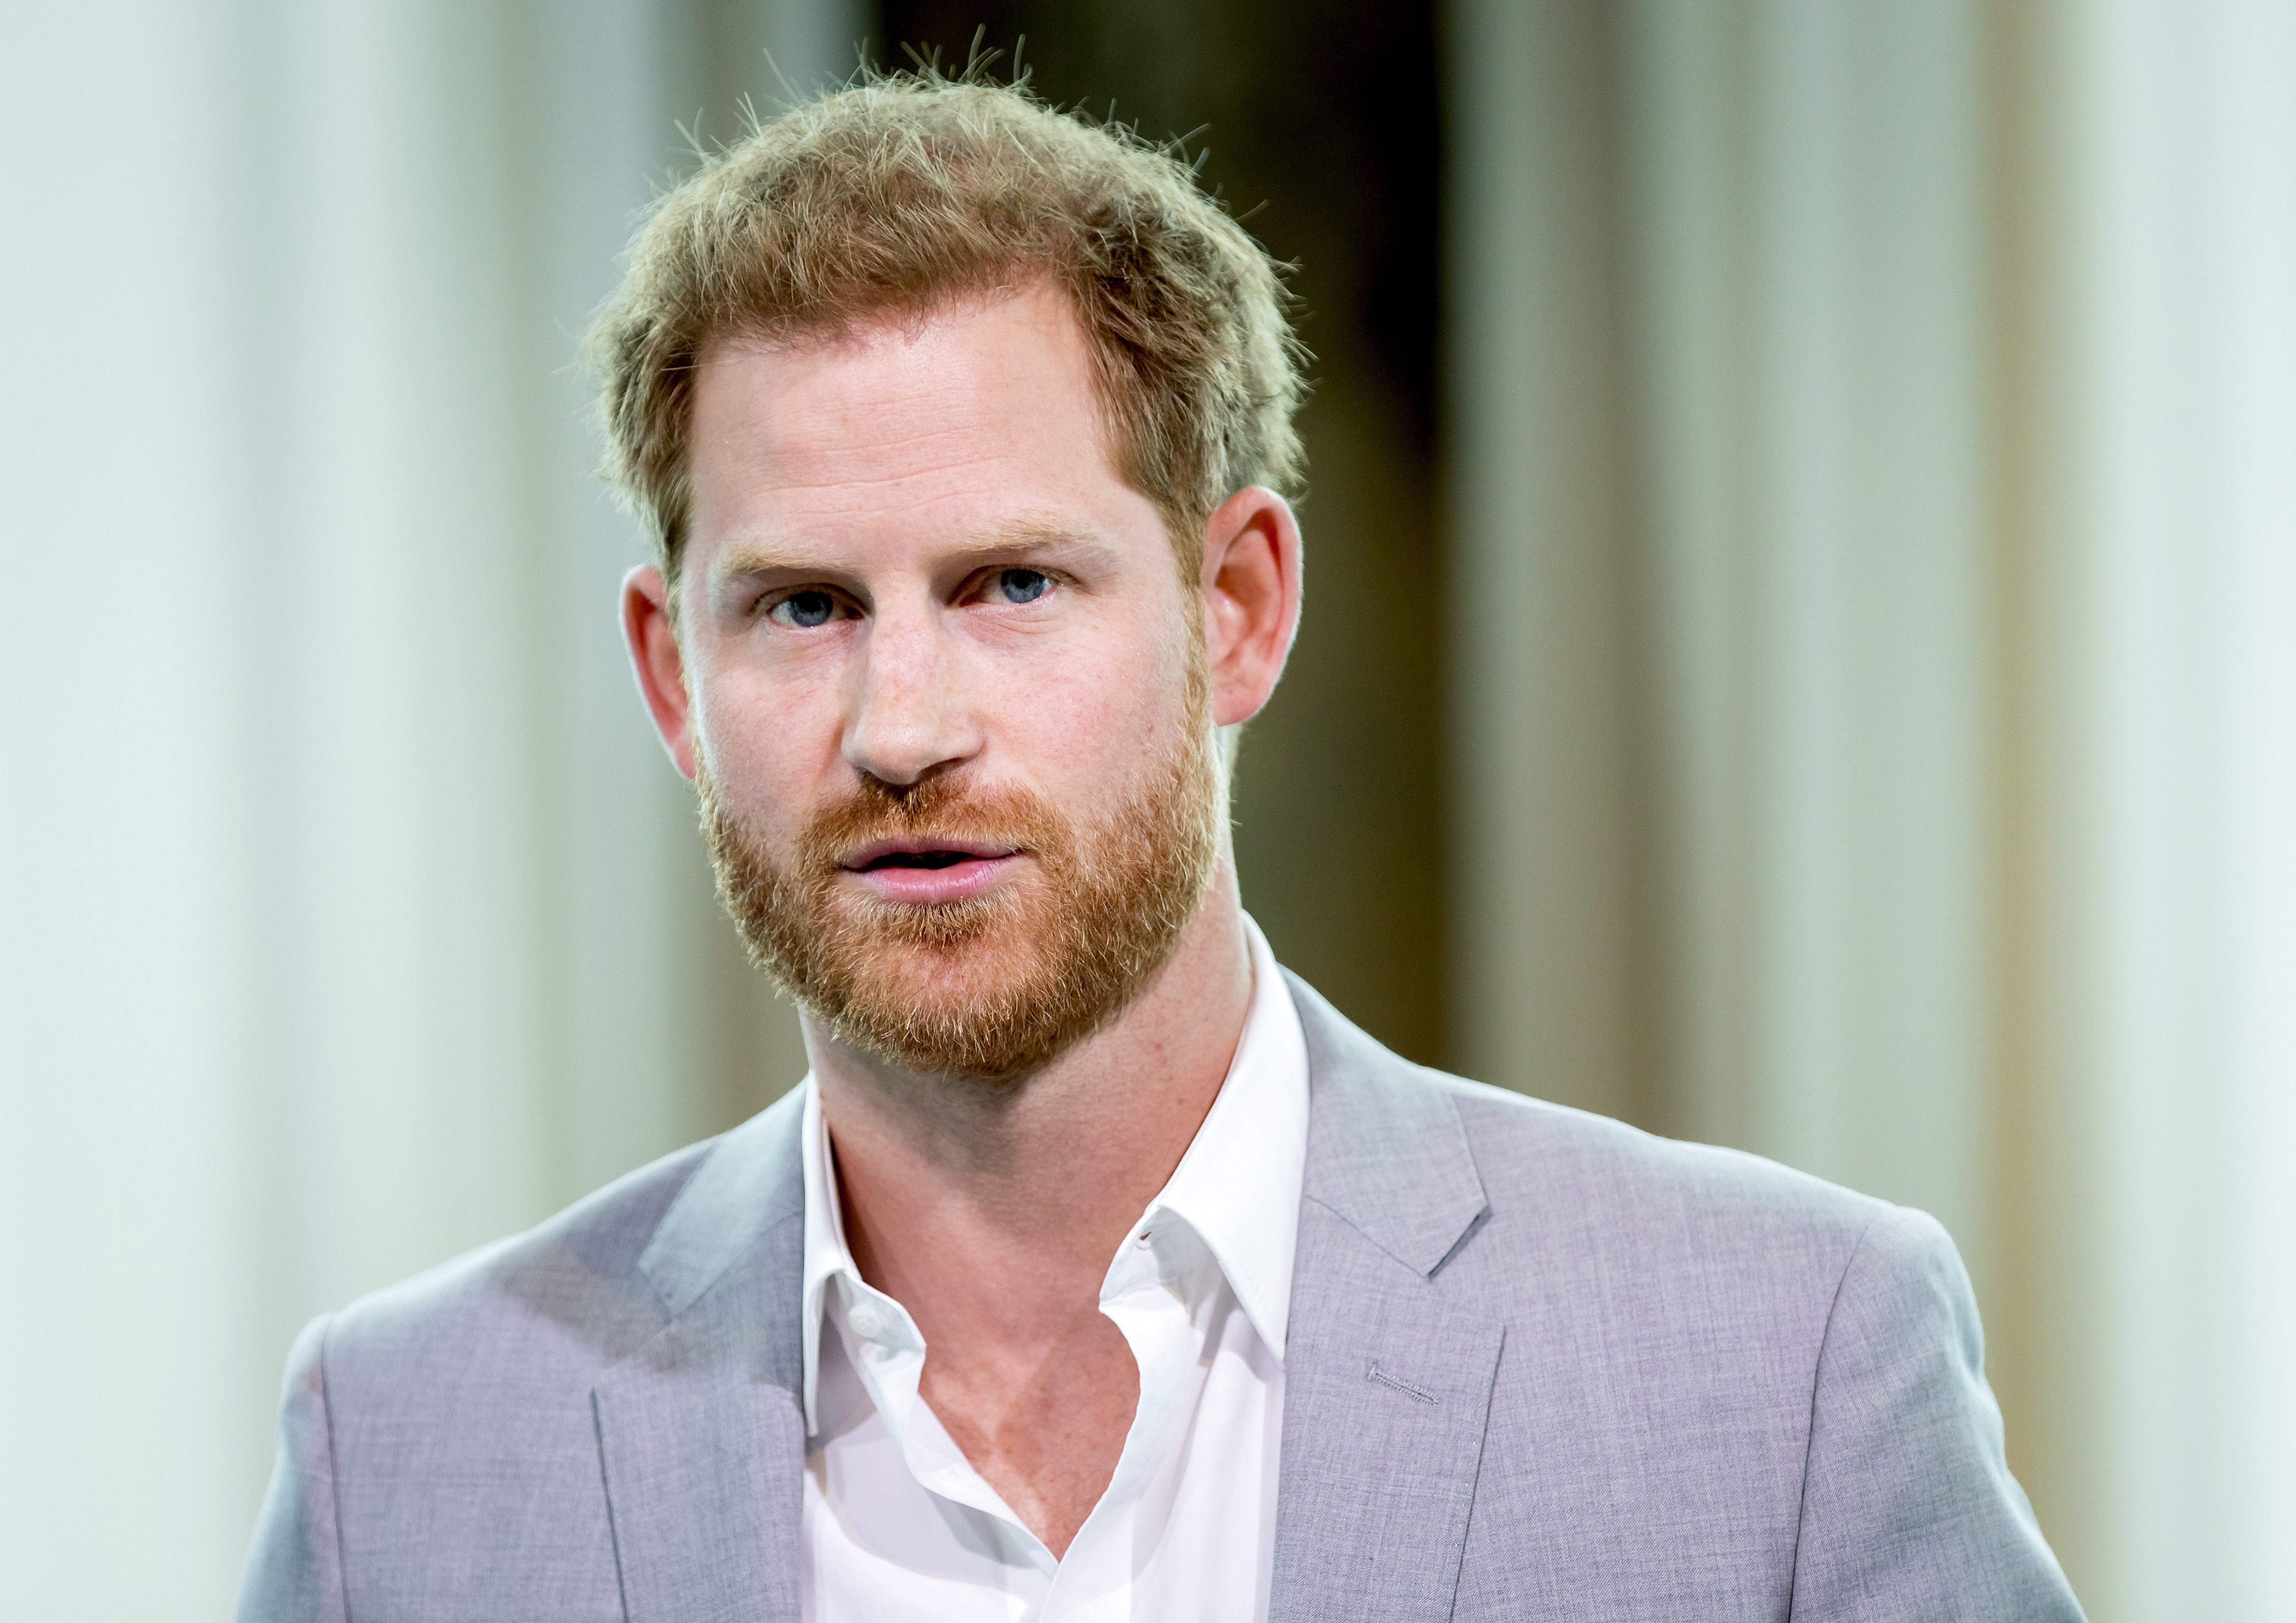 Prince Harry attends the Adam Tower project introduction and global partnership between Booking.com, SkyScanner, CTrip, TripAdvisor and Visa in Amsterdam in 2019.